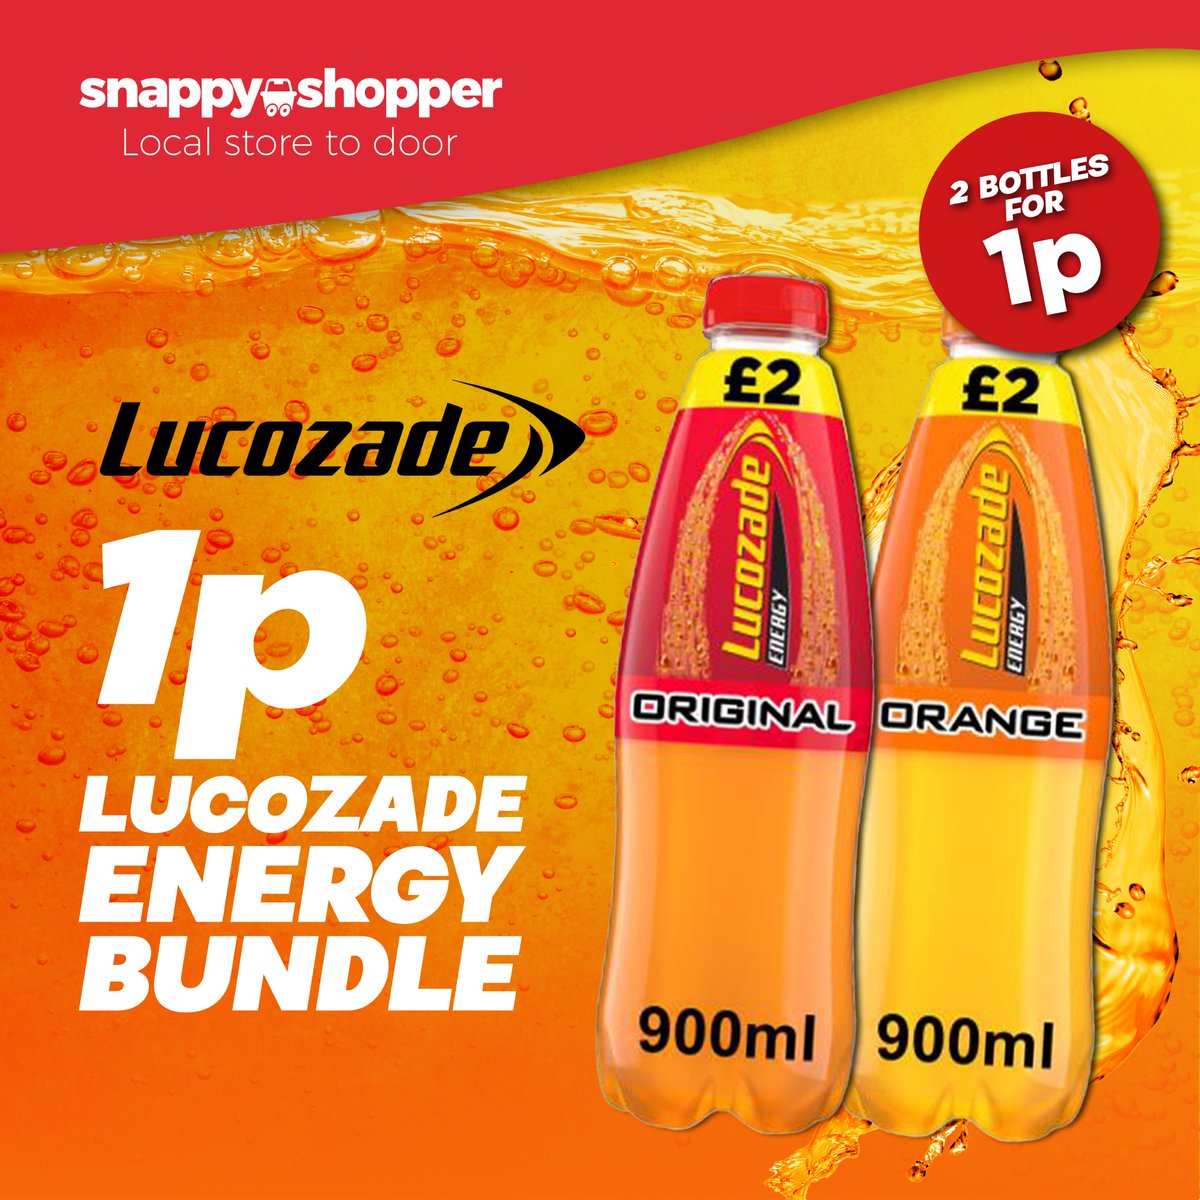 The 1p @Lucozade Energy Bundle is now live! Get your hands on two bottles of Lucozade Energy for just 1p, only on Snappy Shopper ❤️ Get it here > onelink.to/lucozade-retai… #extraenergy #lucozade